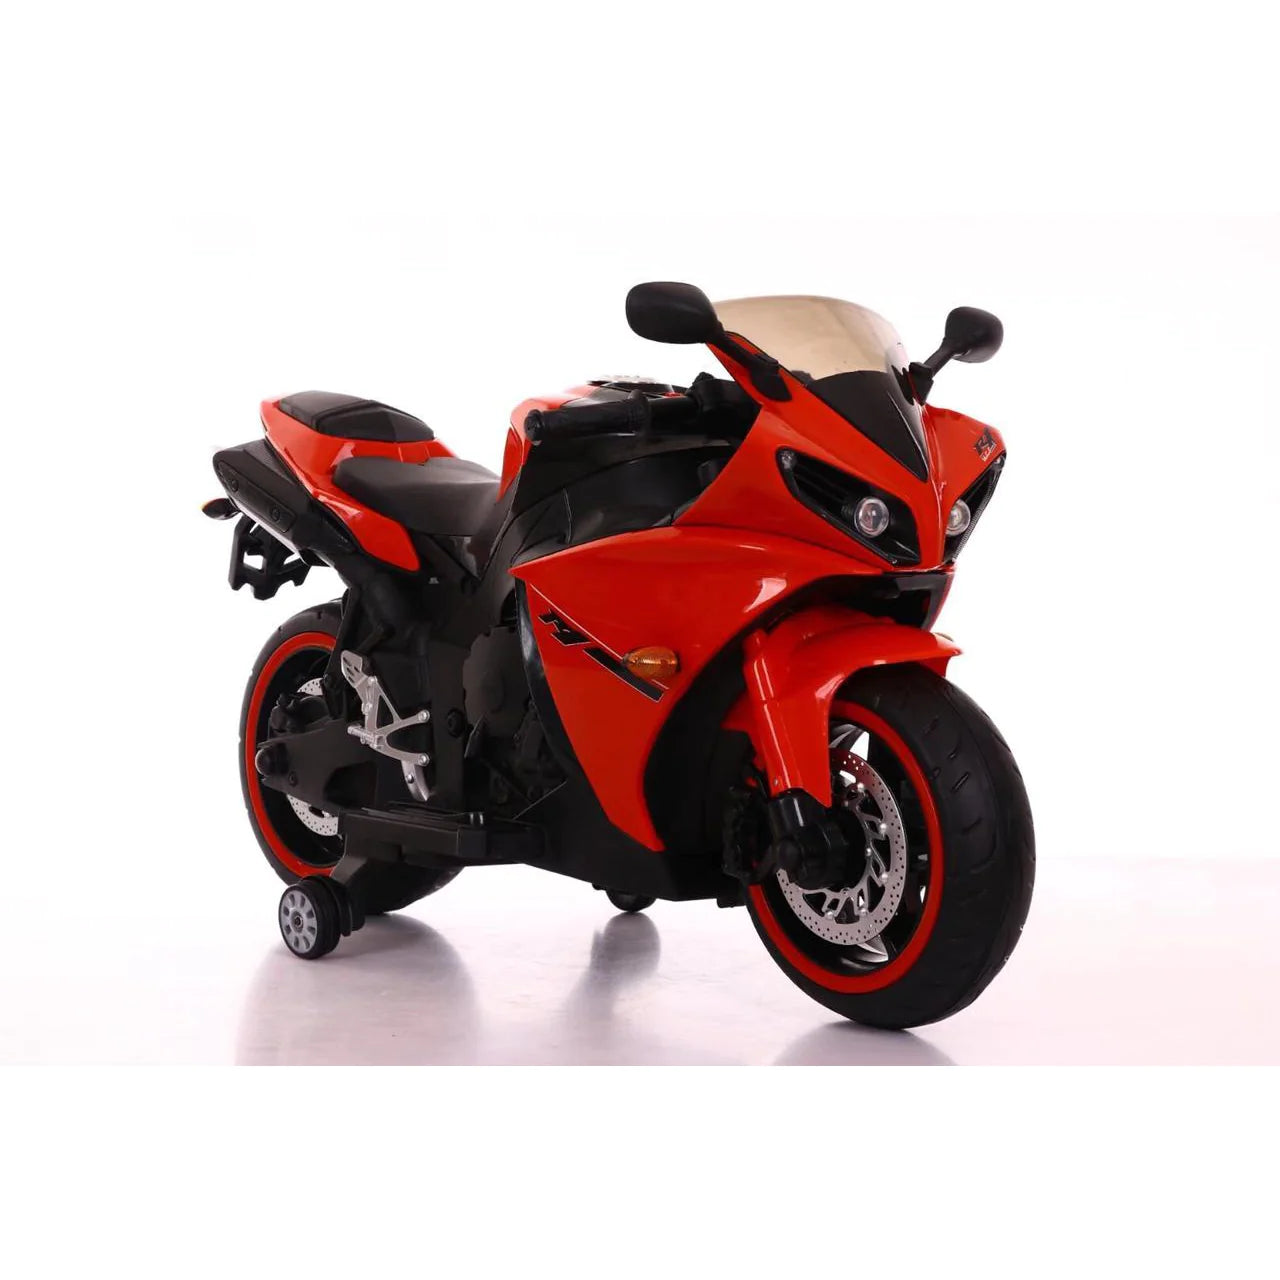 Yamaha R1 12V Battery Operated Motor ride on Bike For Kids | Rechargeable Battery | Red | Age :3 Year +